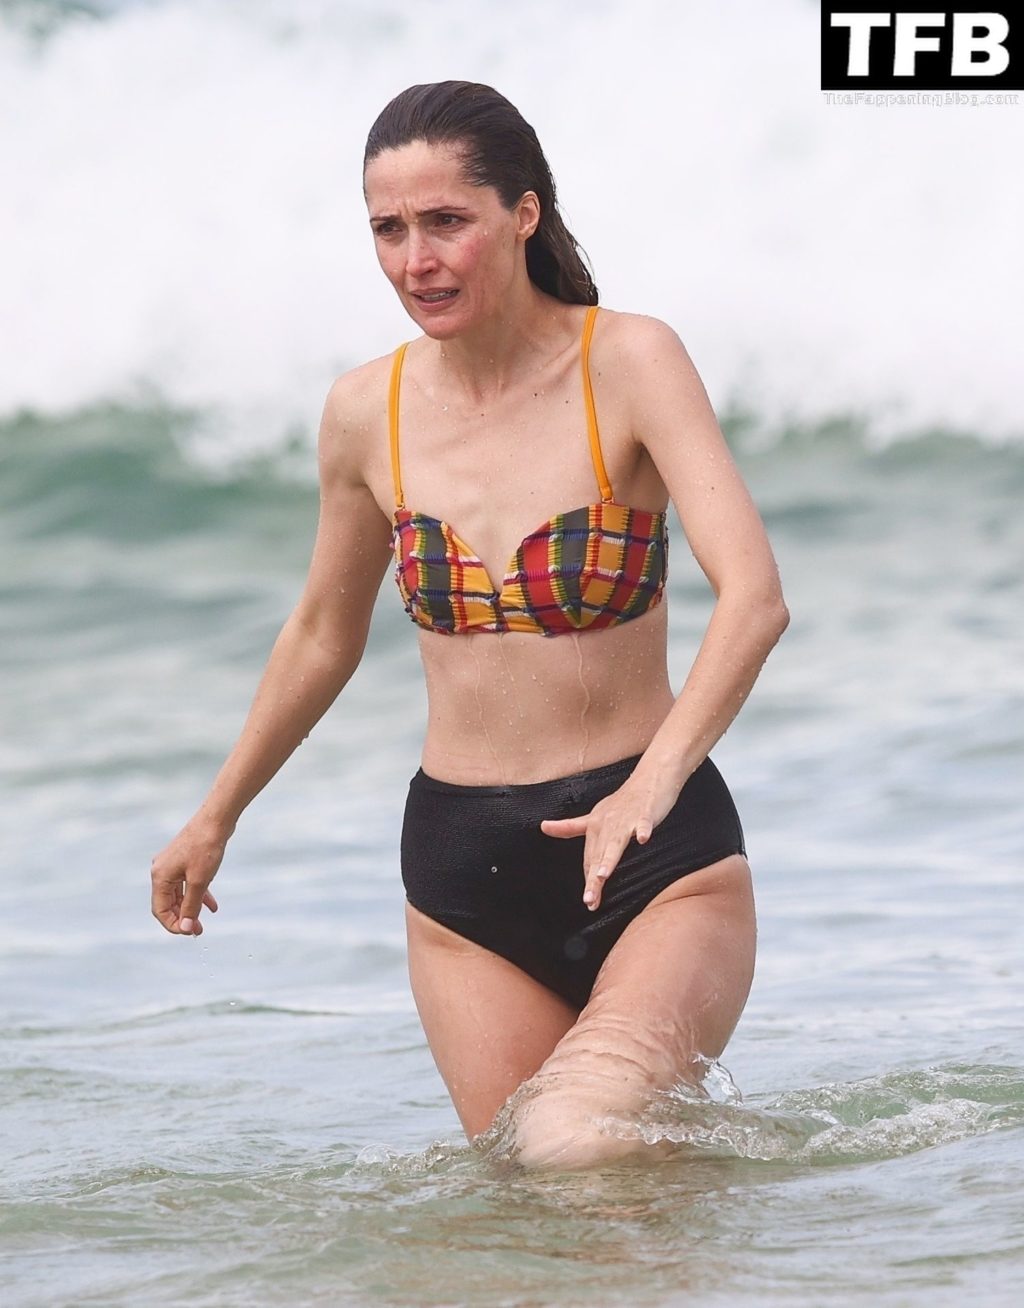 Rose Byrne Sexy The Fappening Blog 49 1024x1308 - Rose Byrne & Kick Gurry Enjoy a Day on the Beach in Sydney (90 Photos)